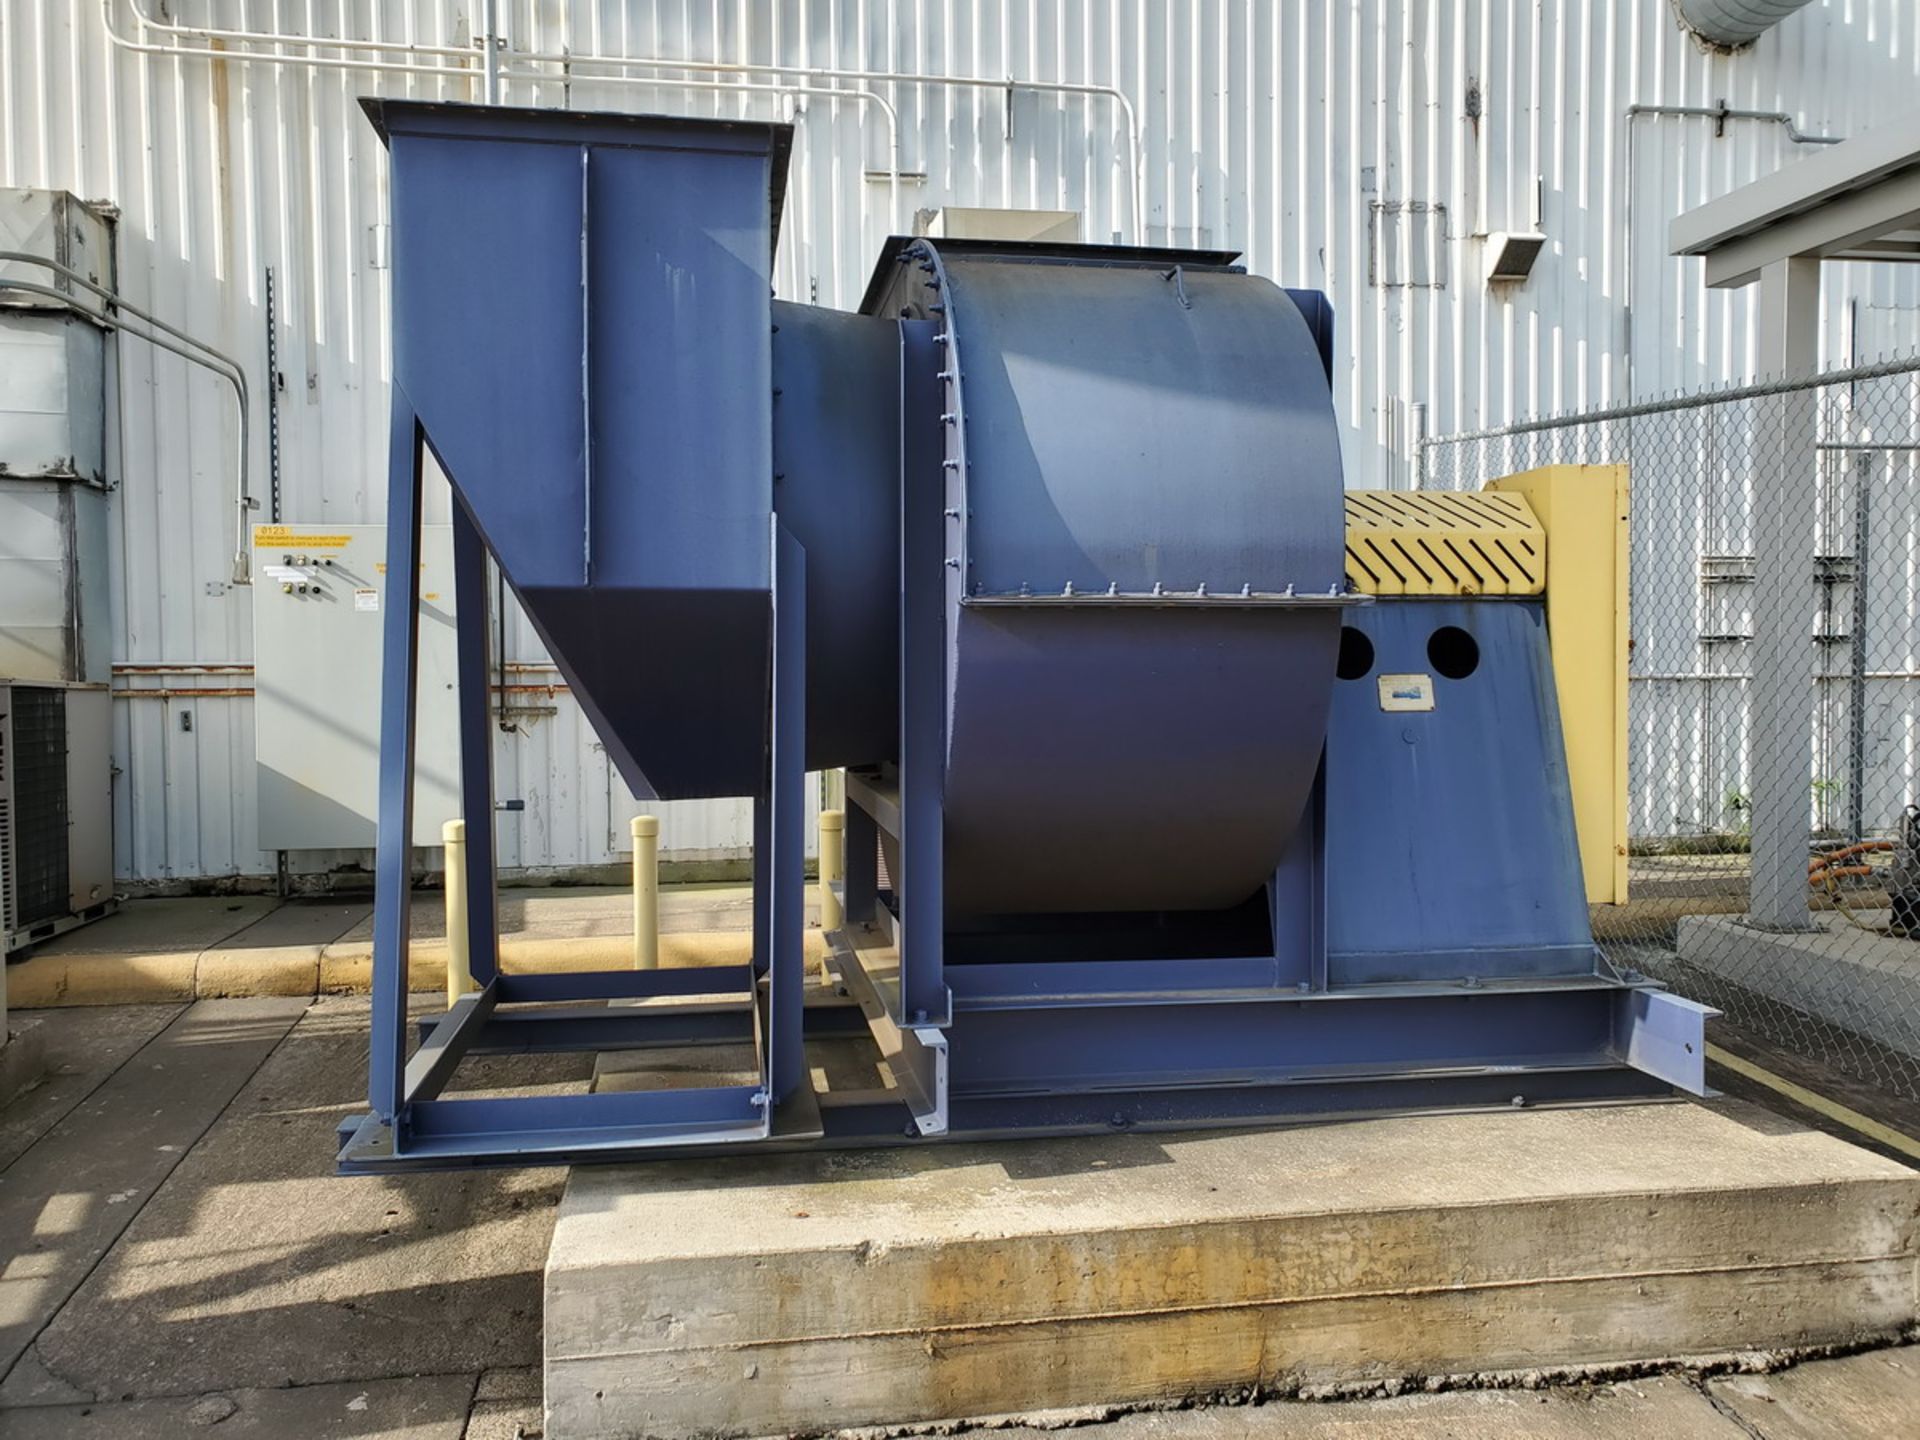 Donaldson Torit Dust Collector Mdl: RF276-10, 100HP, 230-460V, 3PH, 60HZ; W/ Tower, W/ Housing - Image 6 of 15